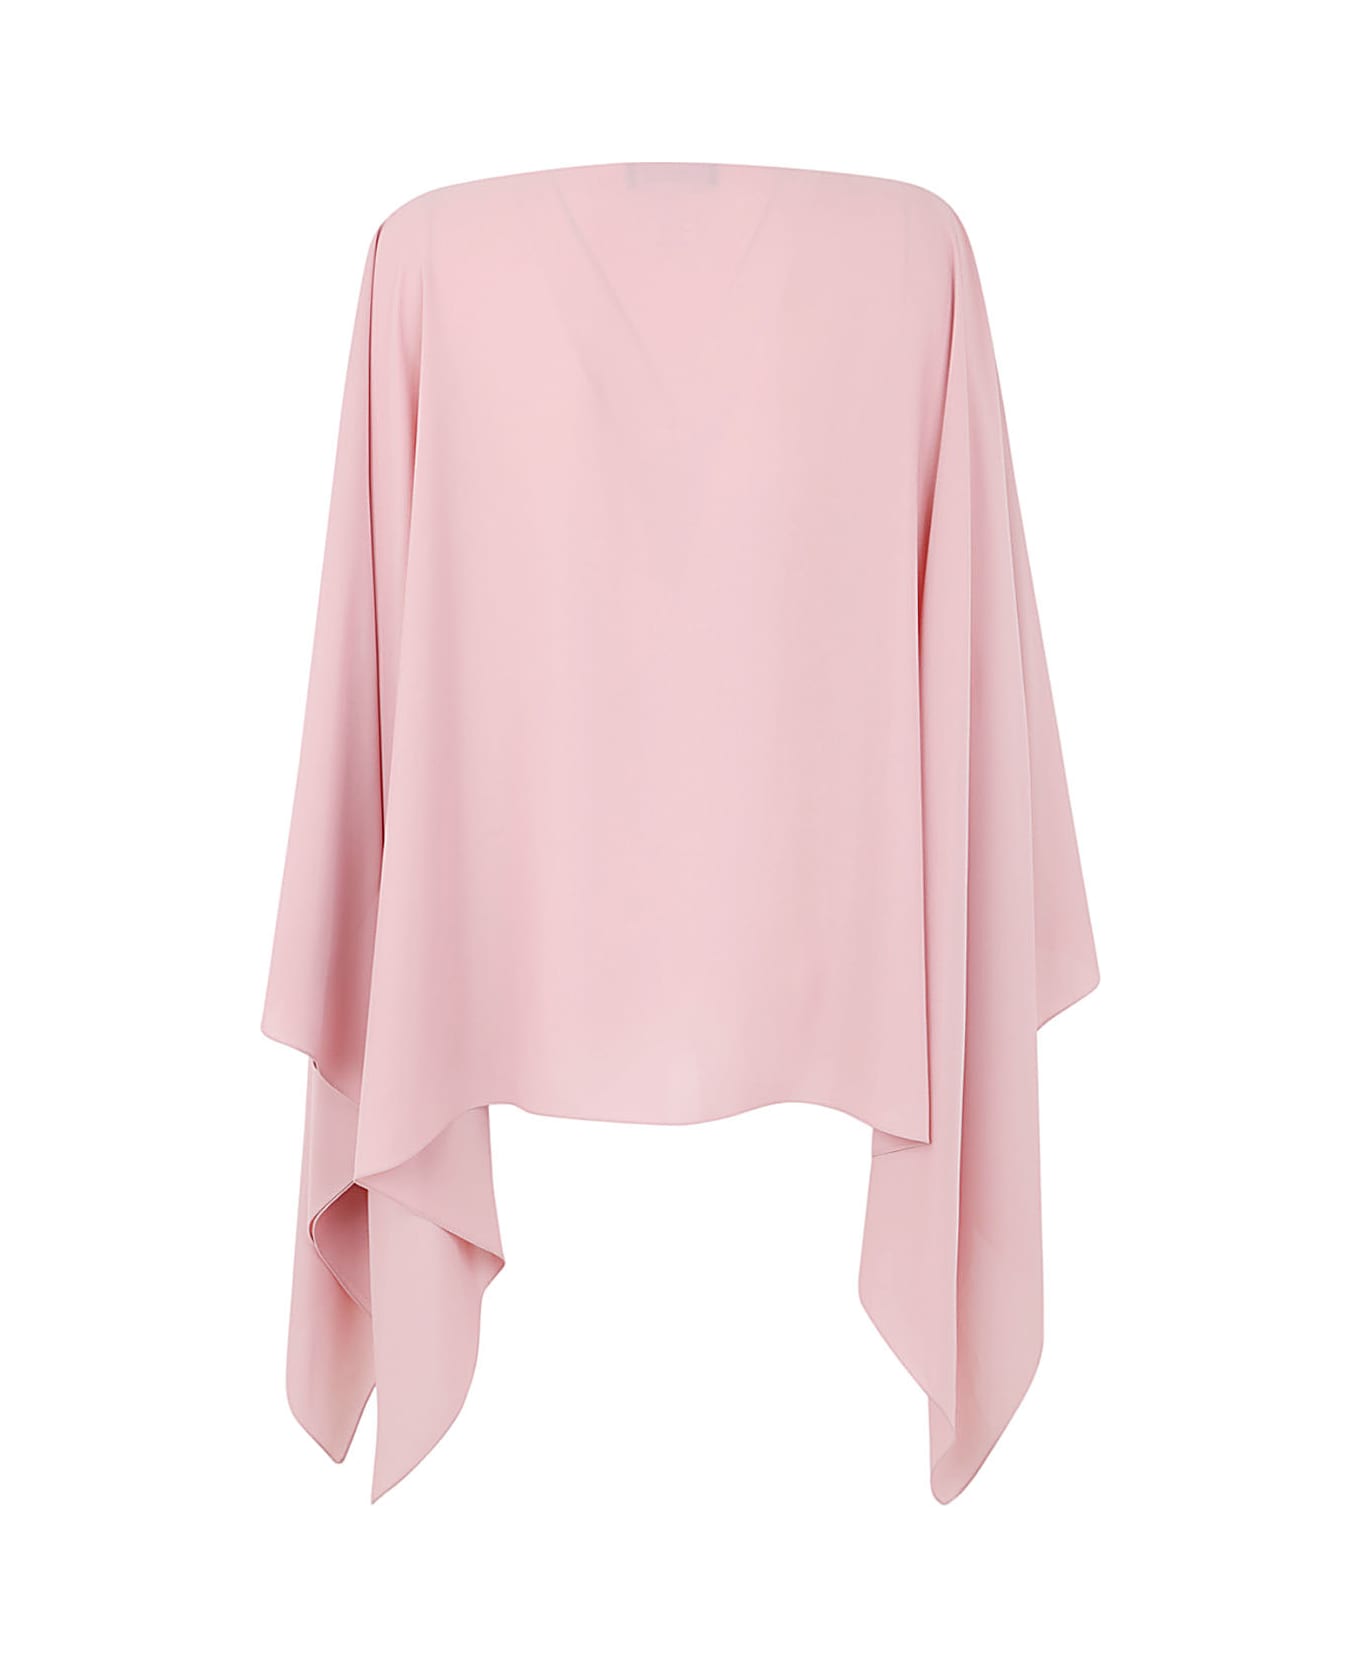 Gianluca Capannolo Eve Top - Light Pink